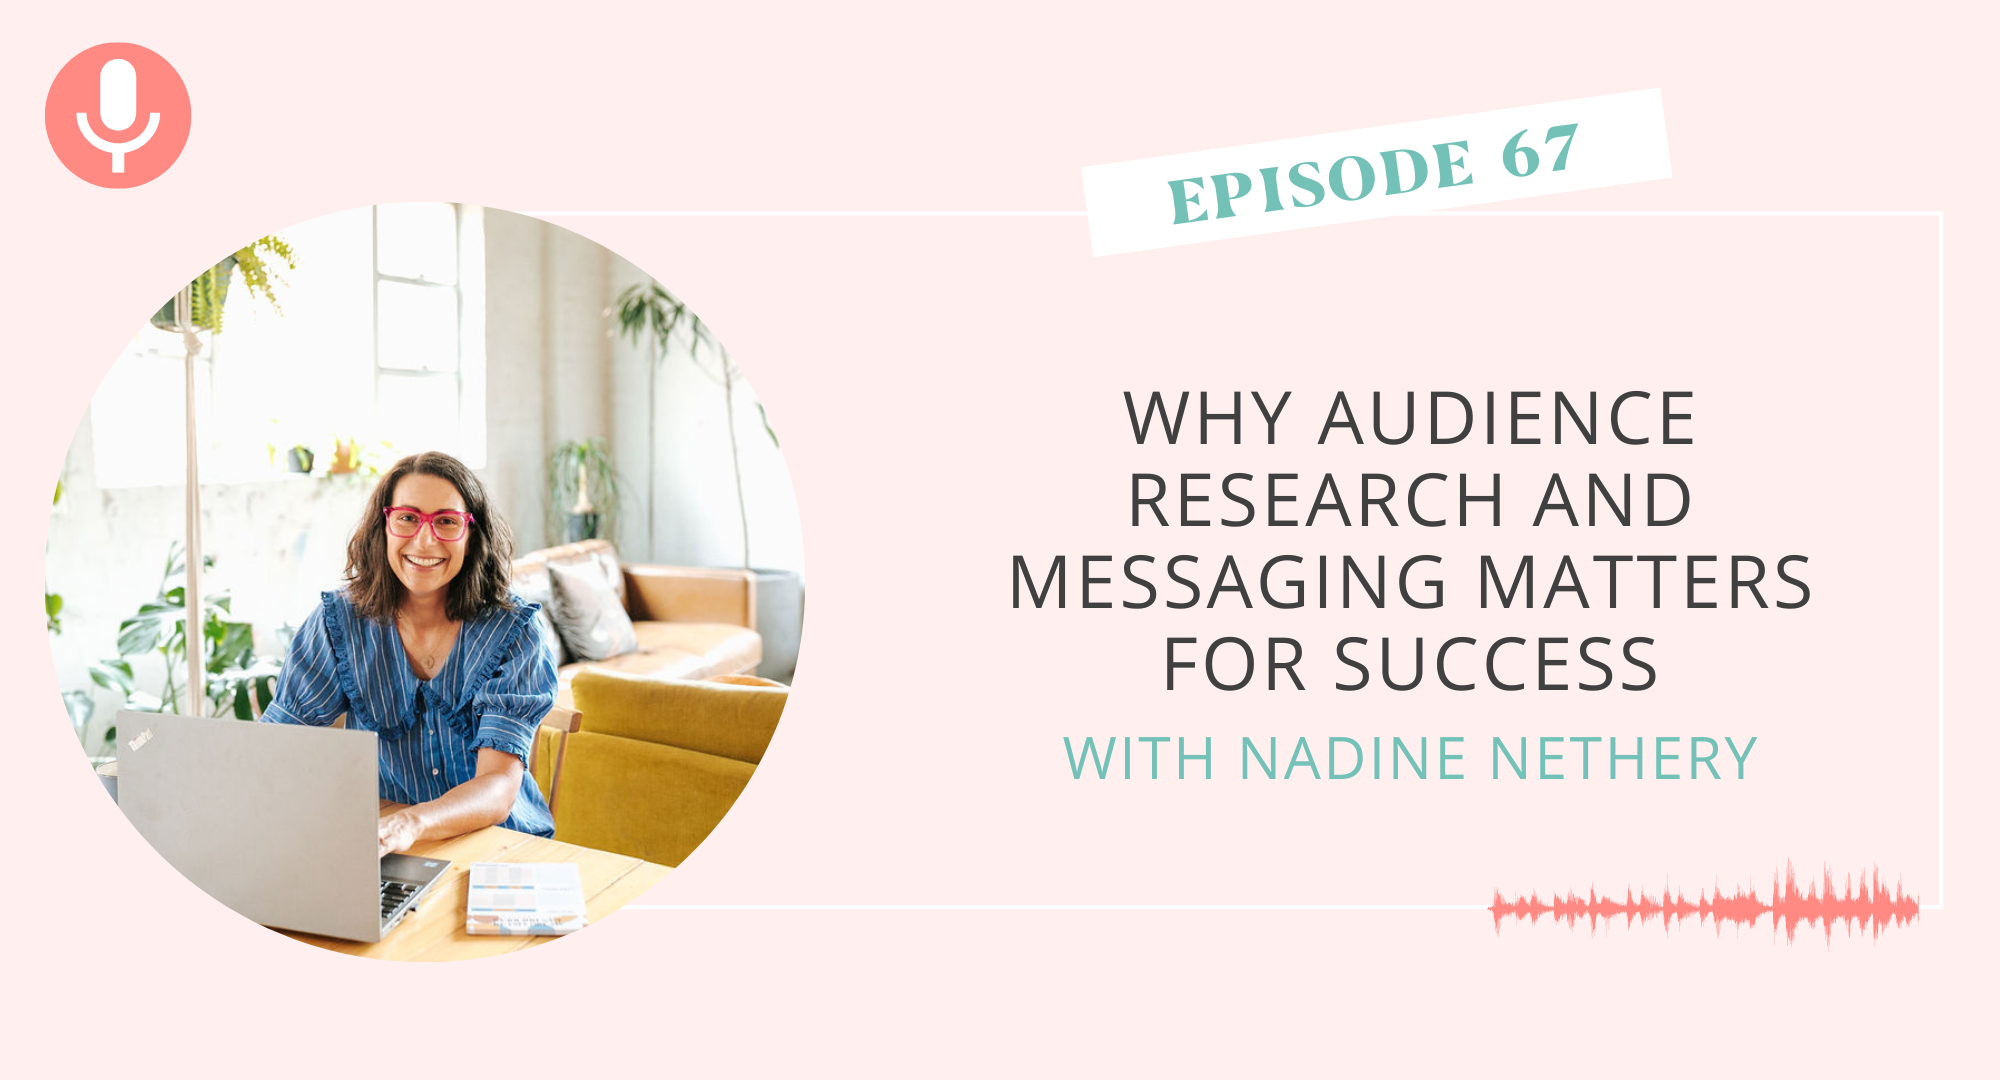 Why Audience Research and Messaging Matters for Success with Nadine Nethery